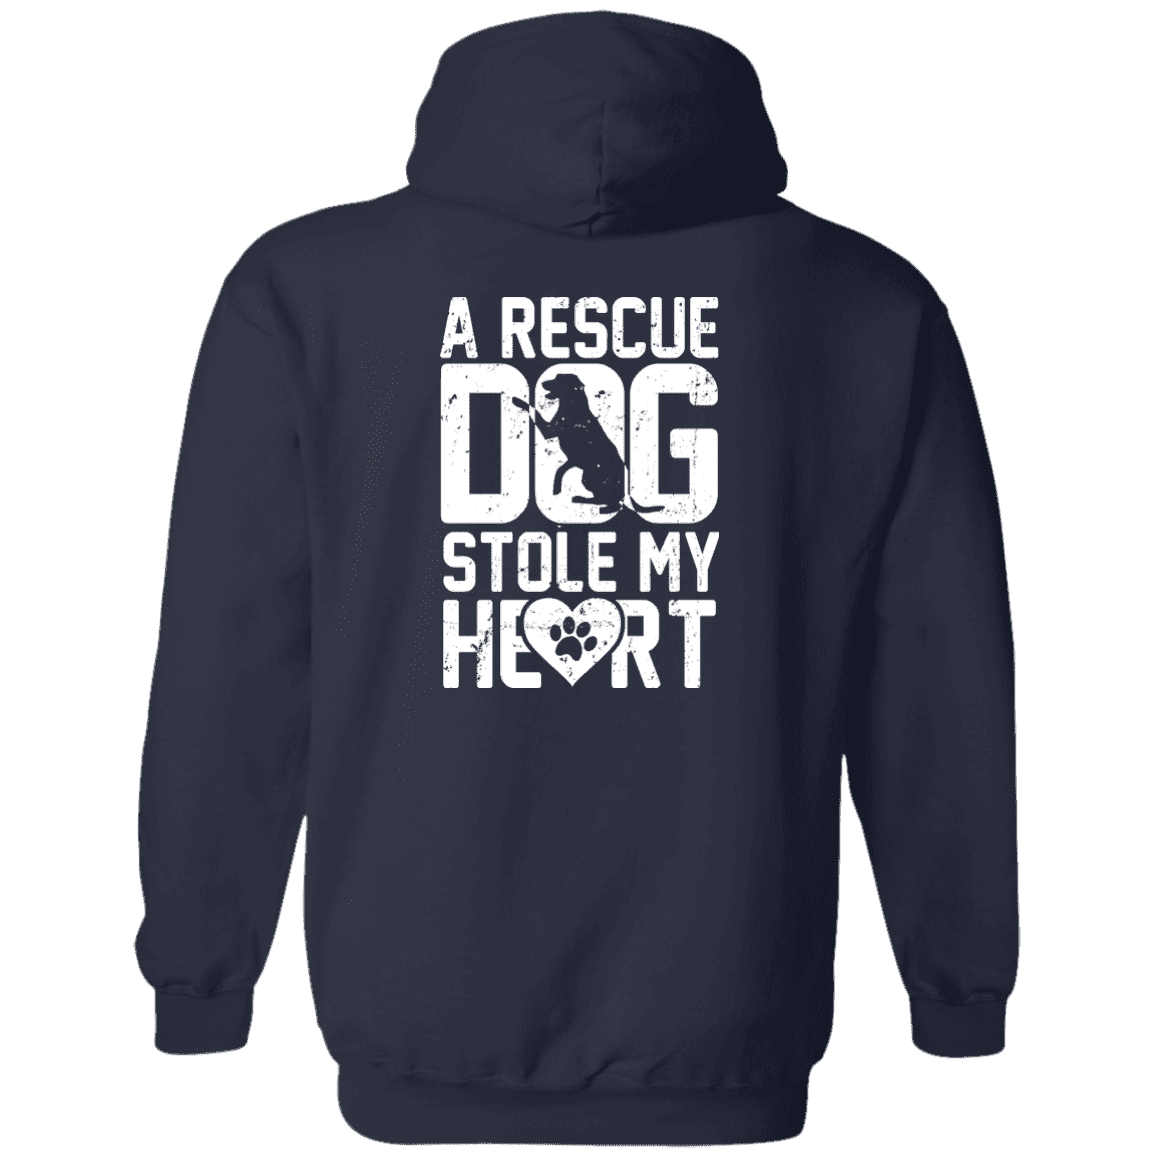 A Rescue Dog Stole My Heart - Hoodie.